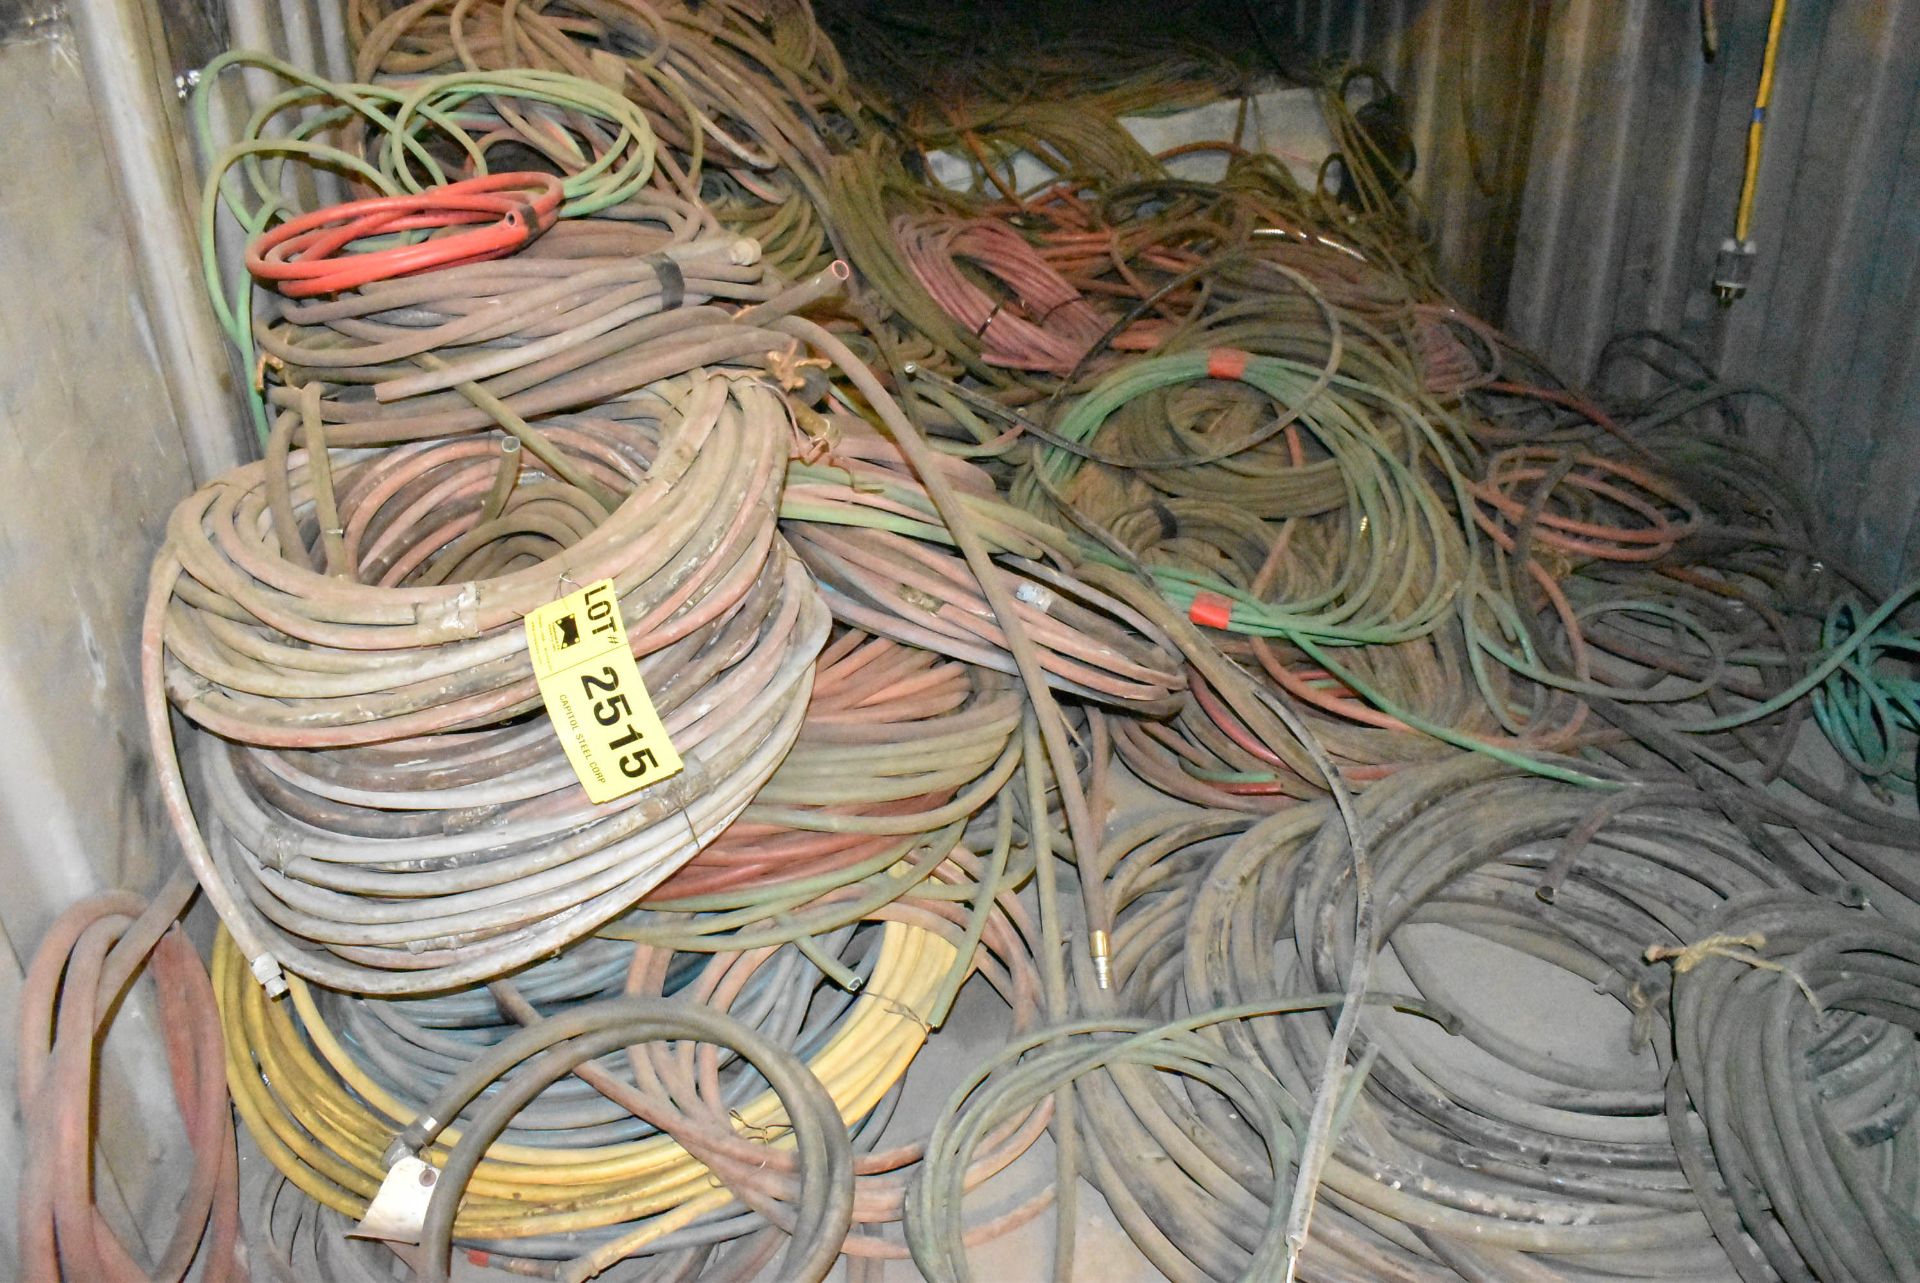 LOT/ CONTENTS OF CONTAINER - PNEUMATIC HOSE, HYDRAULIC HOSE, WELDING CABLES, OXY-ACETYLENE HOSE - Image 2 of 4